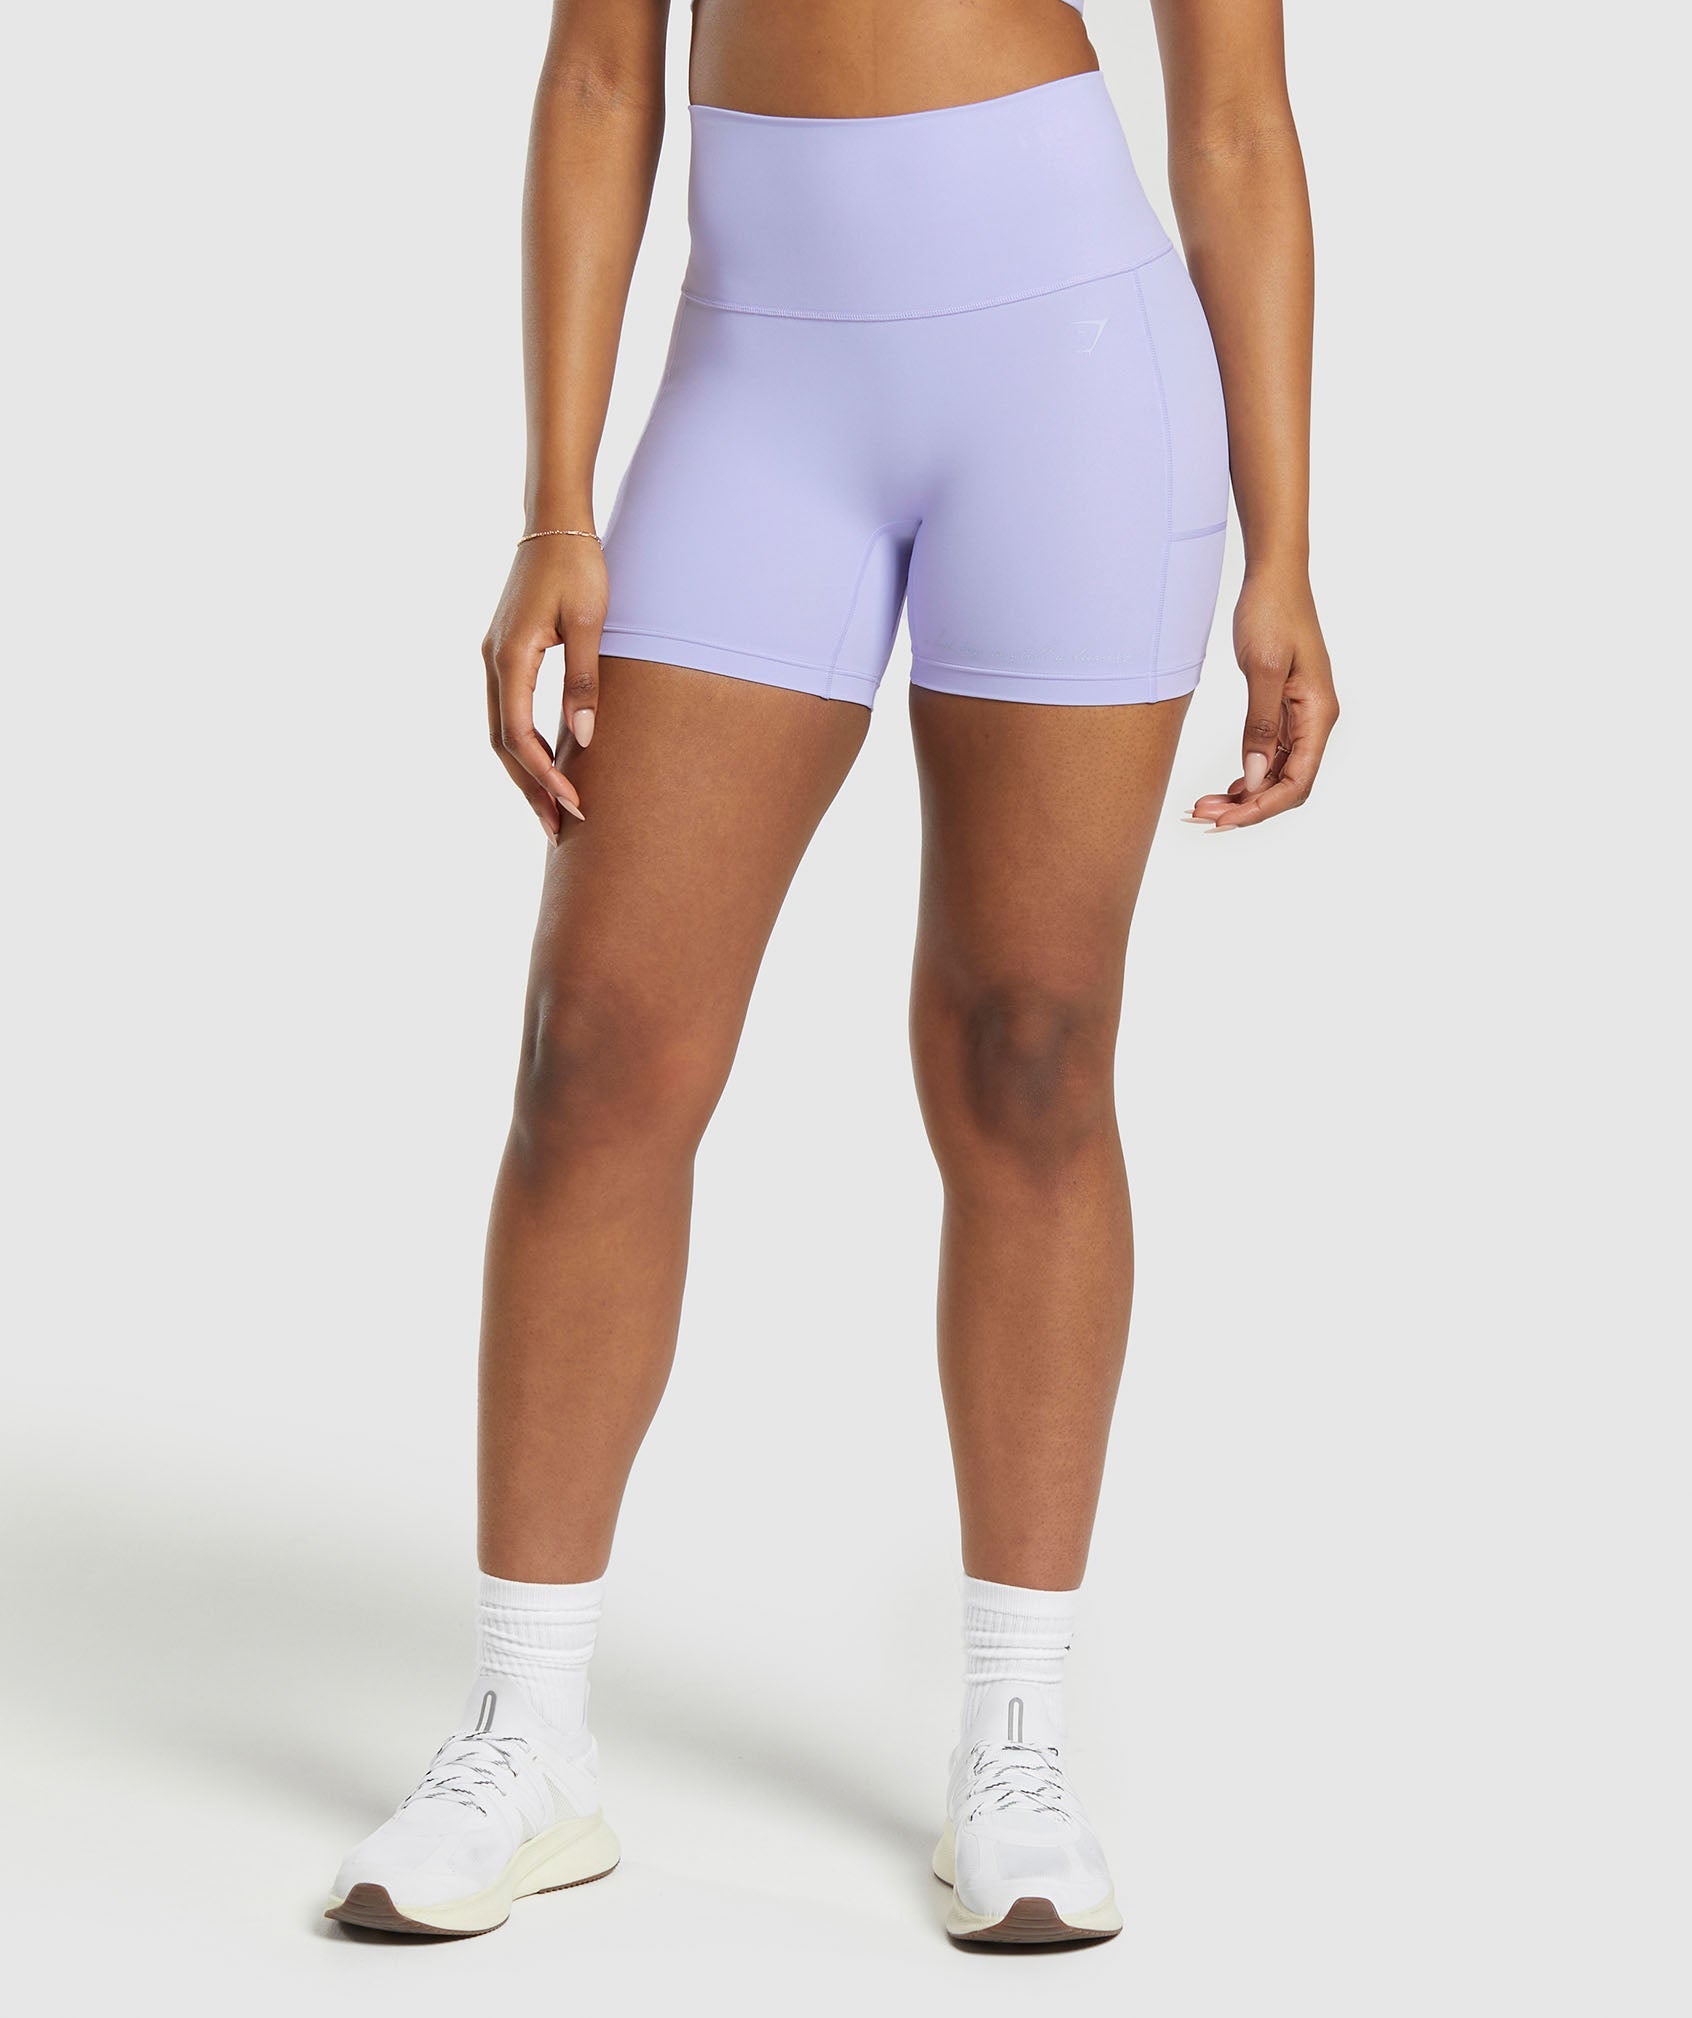 GS x Libby Shorts in Powdered Lilac - view 1